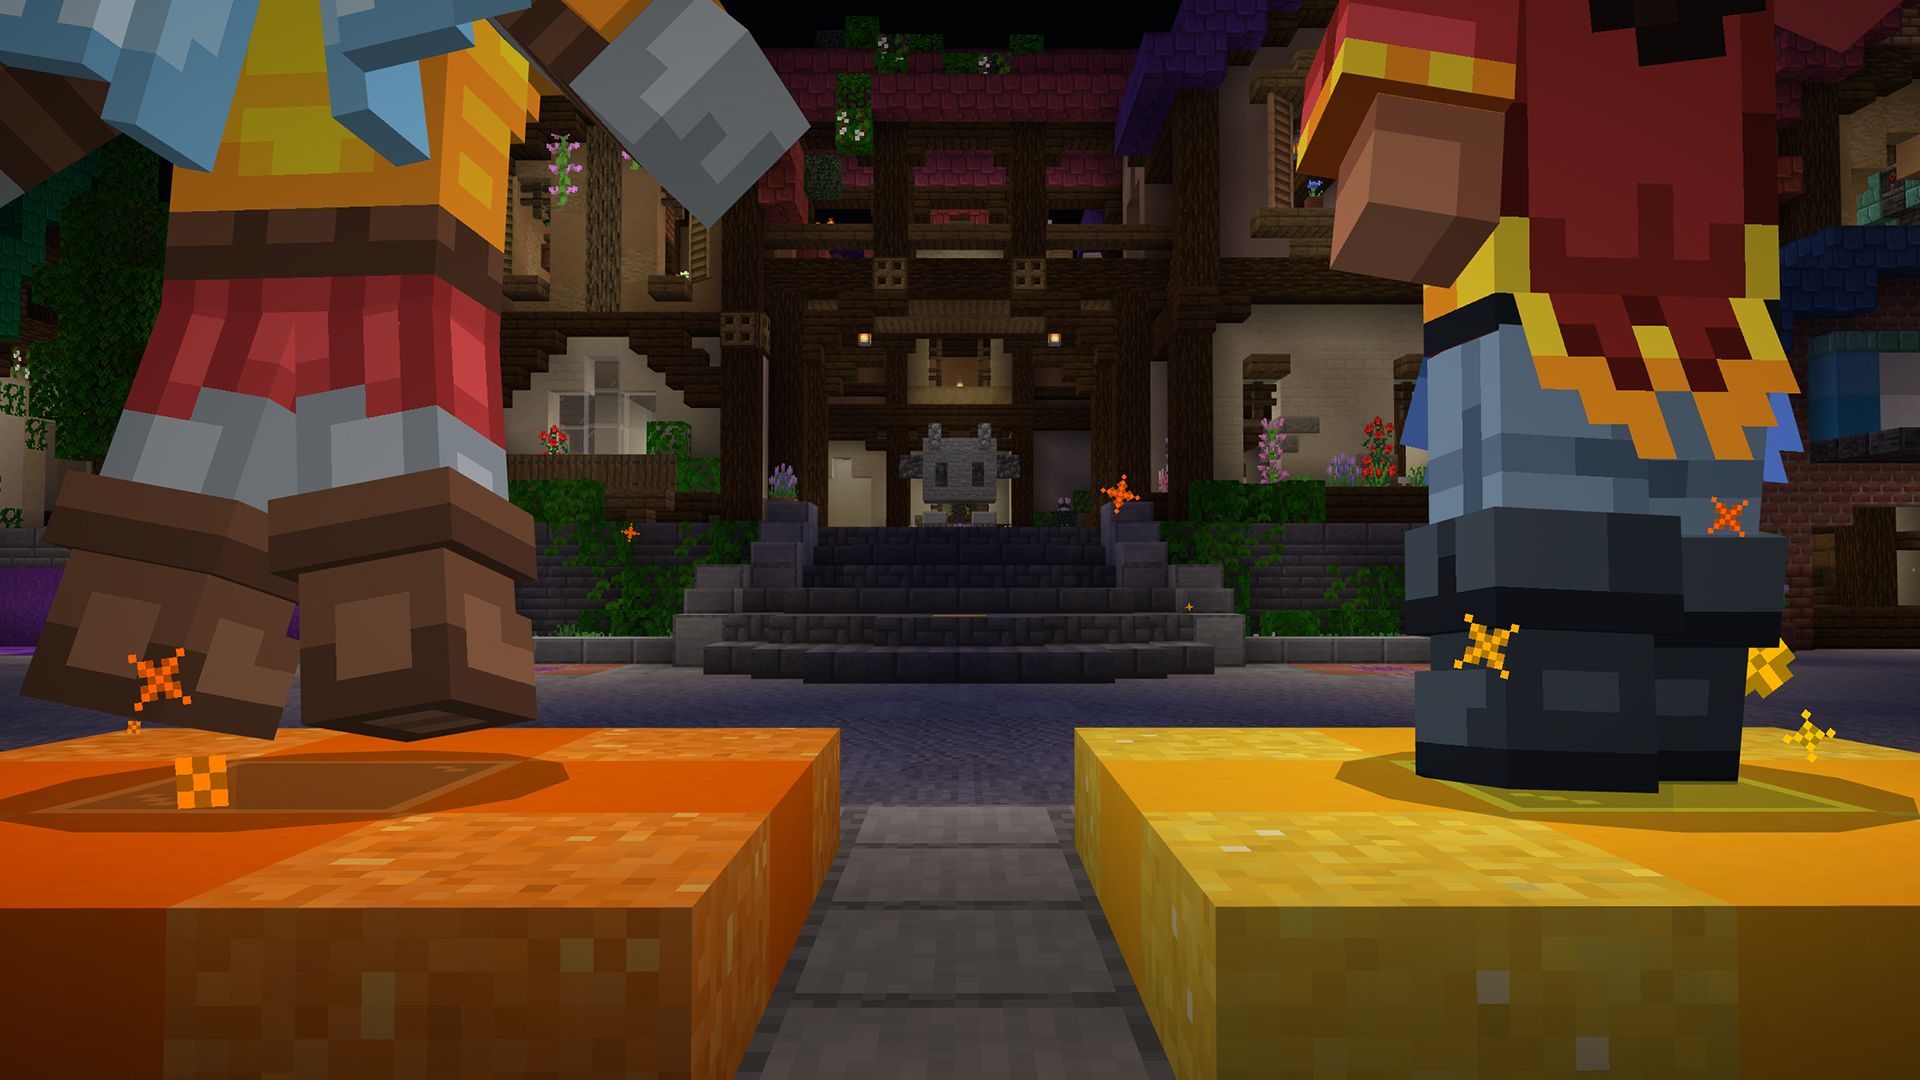 A Minecraft build picture. Two NPCs in the foreground lead way to a bee-themed statue.